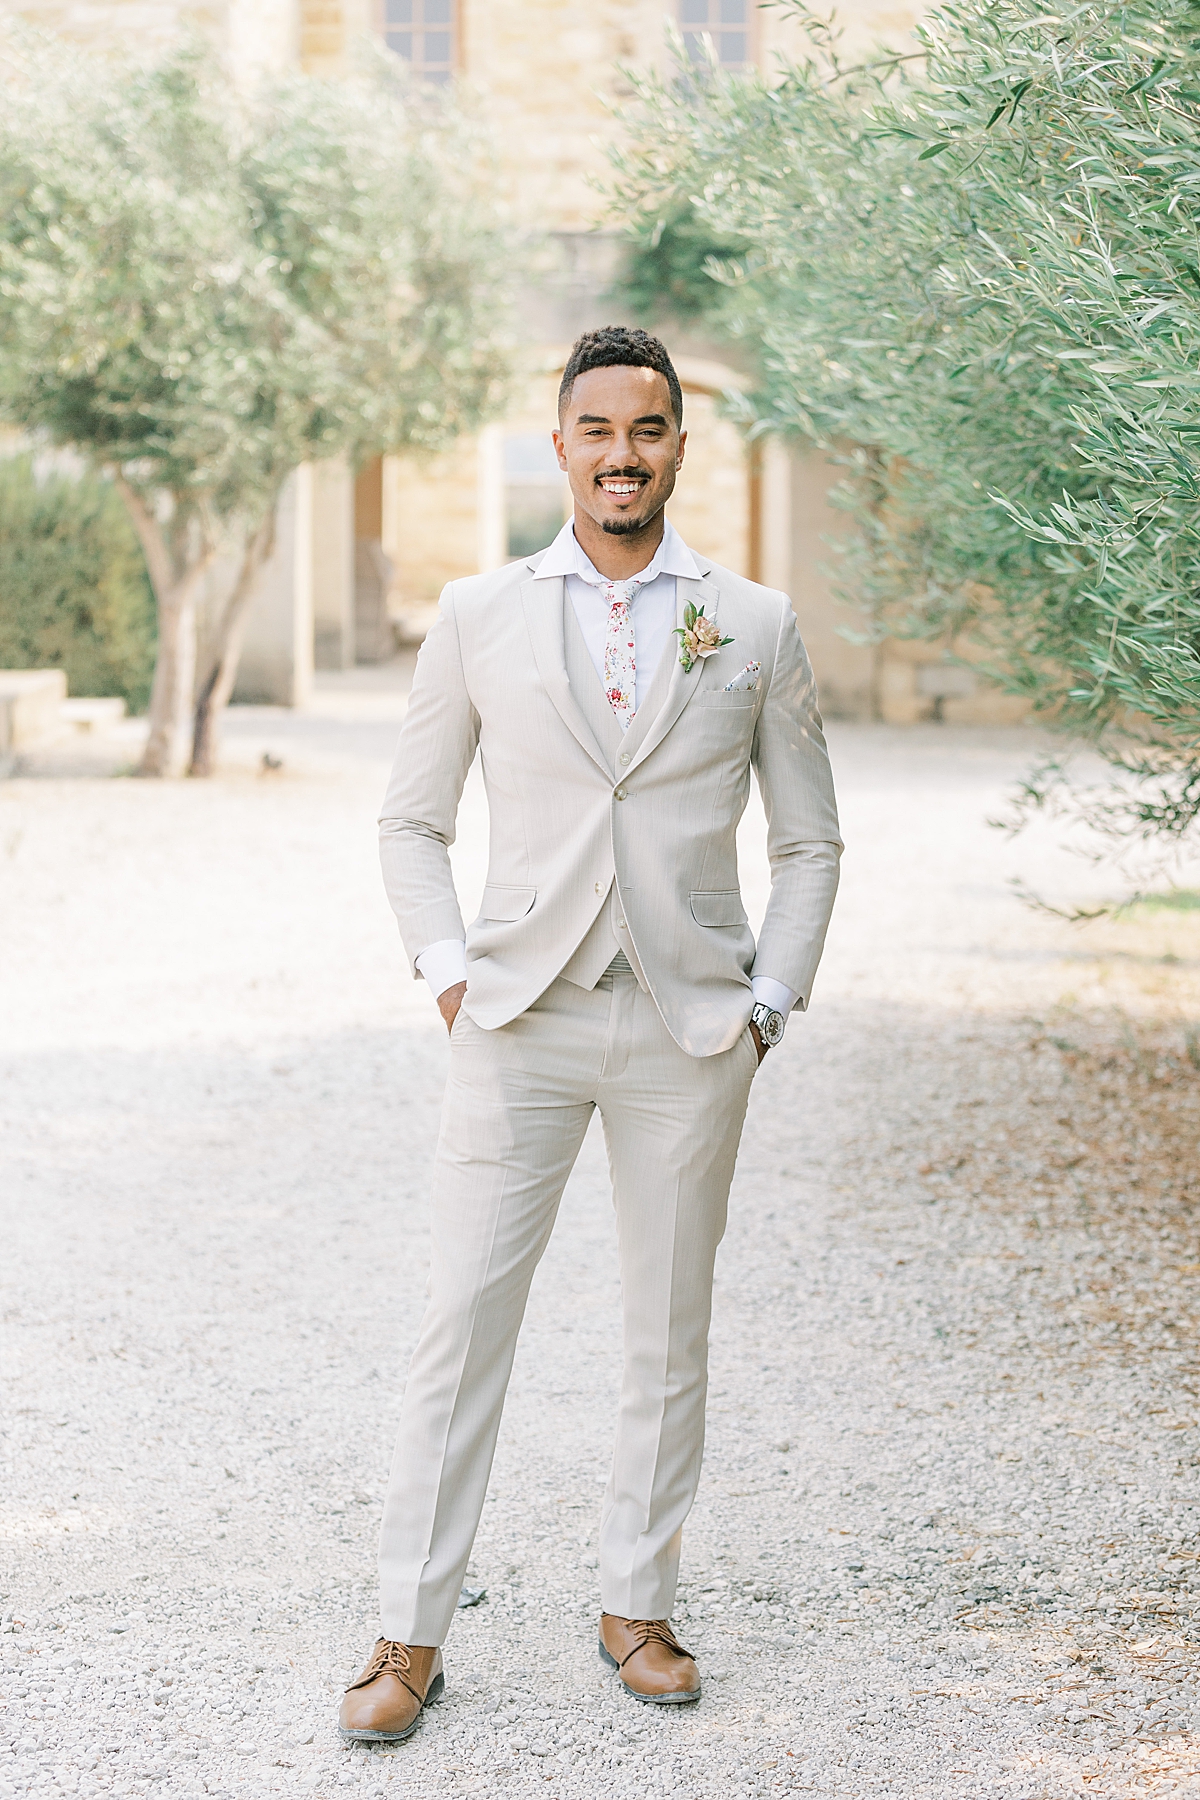 The groom smiling for a portrait at this Sunstone Villa Wedding editorial.